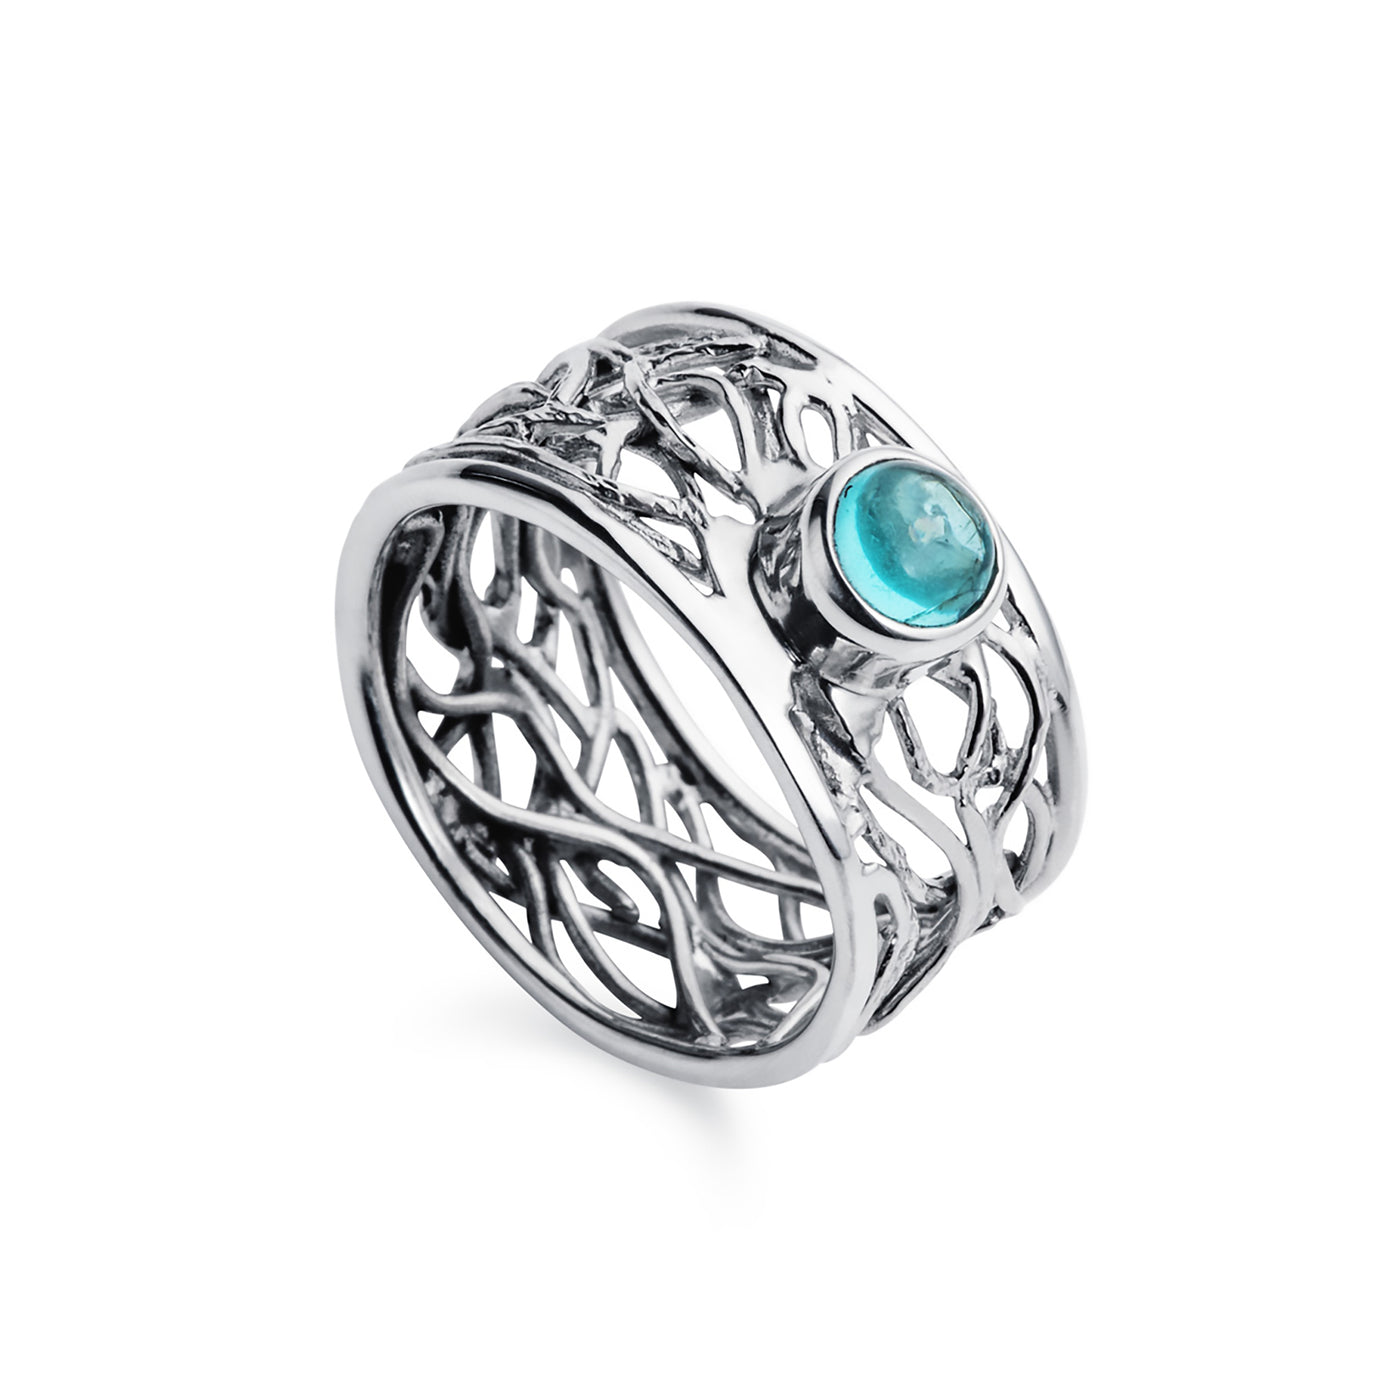 Silver Ring With Apatite Stone